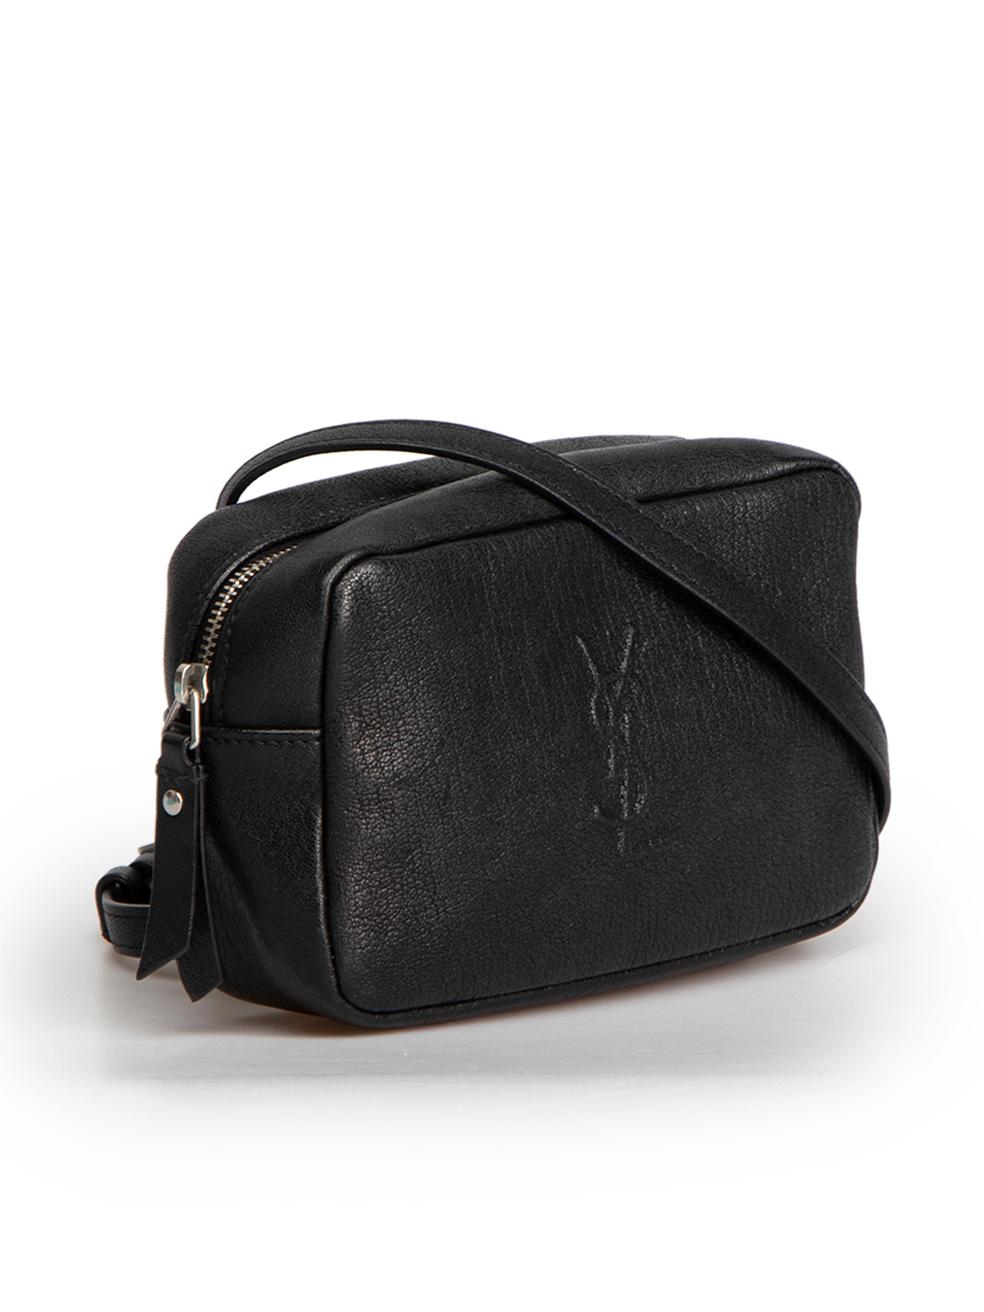 CONDITION is Very good. Minimal wear to bag is evident. Minimal wear to the front with very light indents to the leather on this used Saint Laurent designer resale item.
 
 Details
 Lou
 Black
 Leather
 Embossed logo
 Mini belt bag
 Adjustable